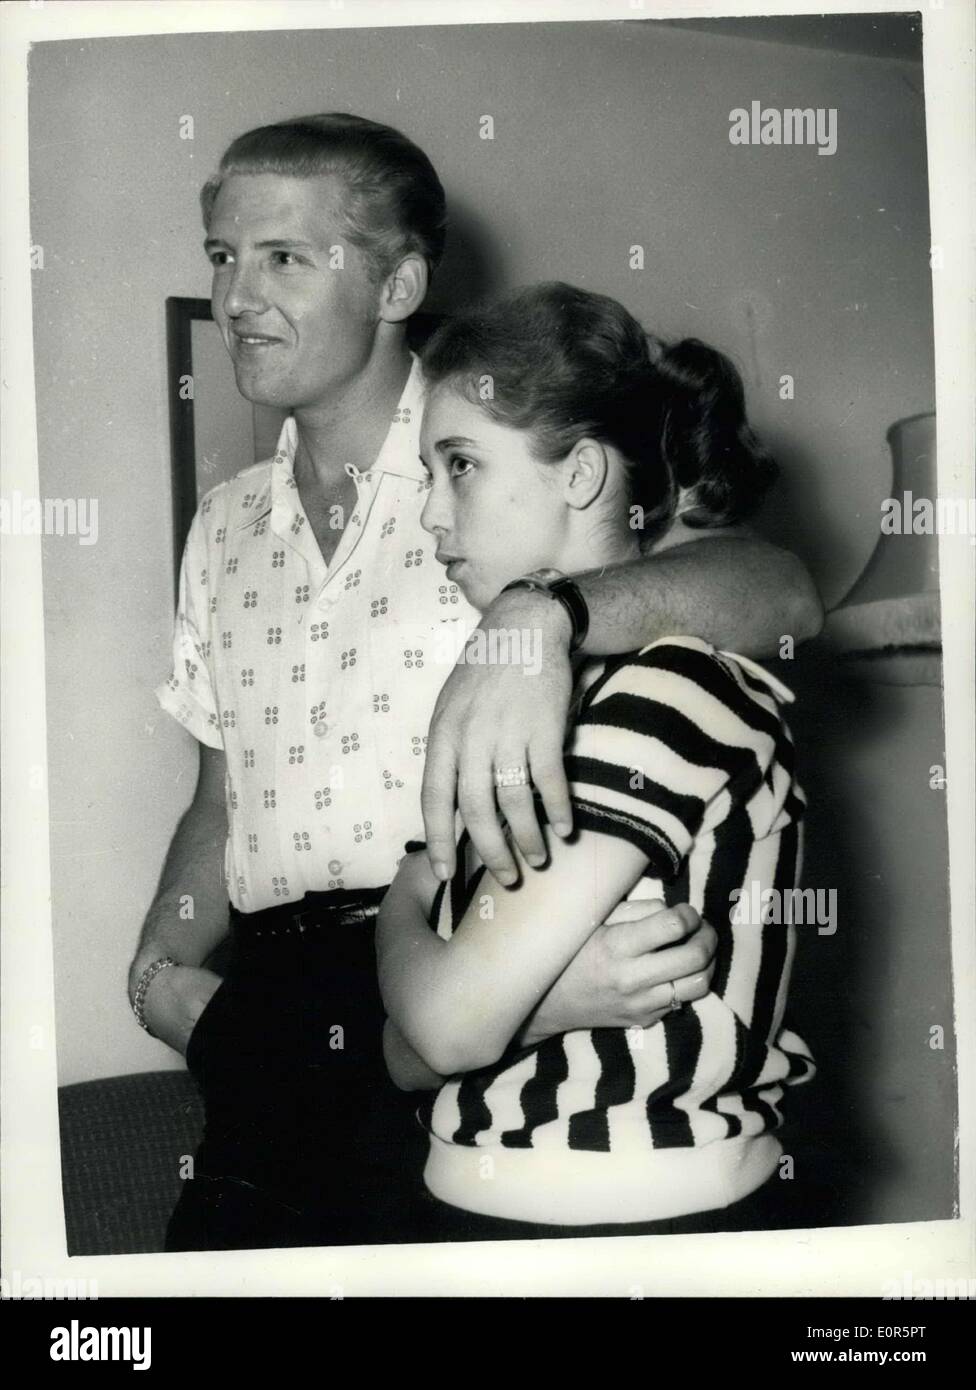 May 23, 1958 - 22 Year-Old American Rock 'N Roll Singer Arrives Here With His 15 Year Old Wife; Jerry Lee Lewis, the American rock ' n roll singer, flew into London yesterday with a shock for his fans. For the girl who arrived with him turned out to be his 15 year old wife of two months. her name was Myra, and she is his third wife. Jerry was first married at 15 and again at 17, but this time he says he has found the right girl. When asked if she thought that fifteen was too young to be a wife, Myra explained that back at her home town Memphis Tennessee, you can marry at the age of ten Stock Photo